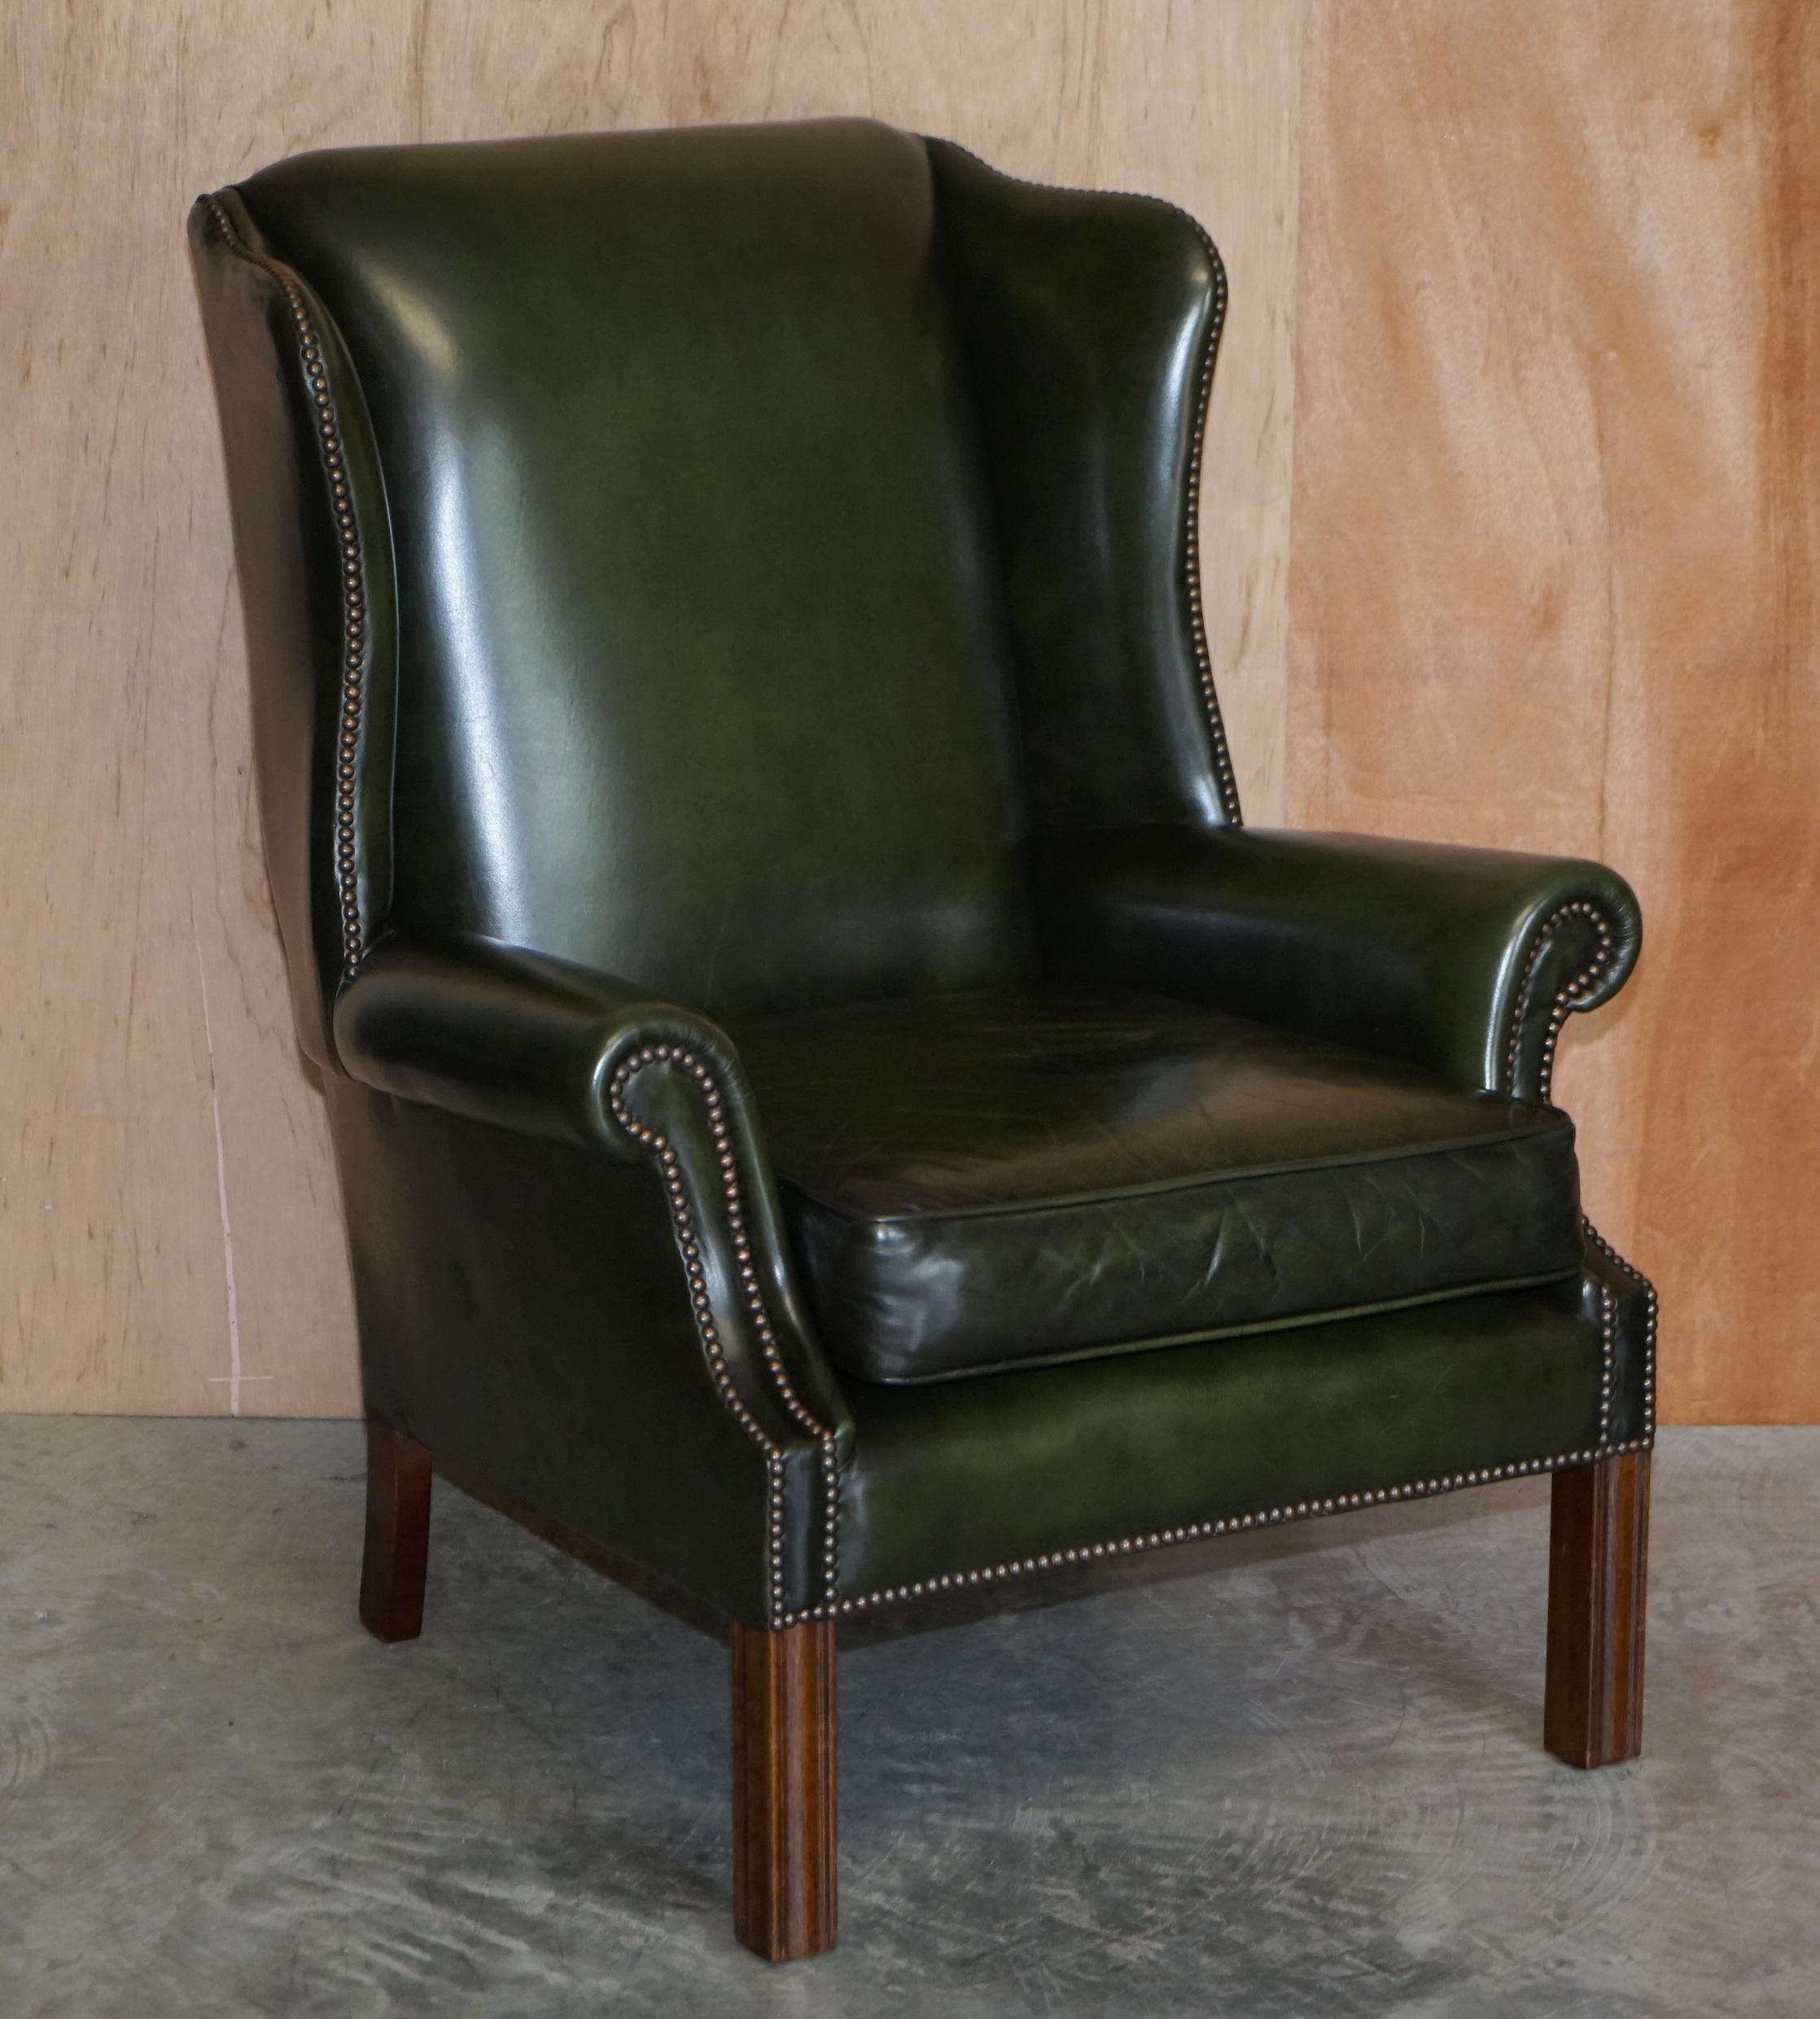 We are is delighted to offer for sale this pair of near new old stock condition, Harrods London retailed, Pegasus Art Forma made, regency green leather wingback armchairs.

These chairs are wonderfully English! They have a slightly more relaxed